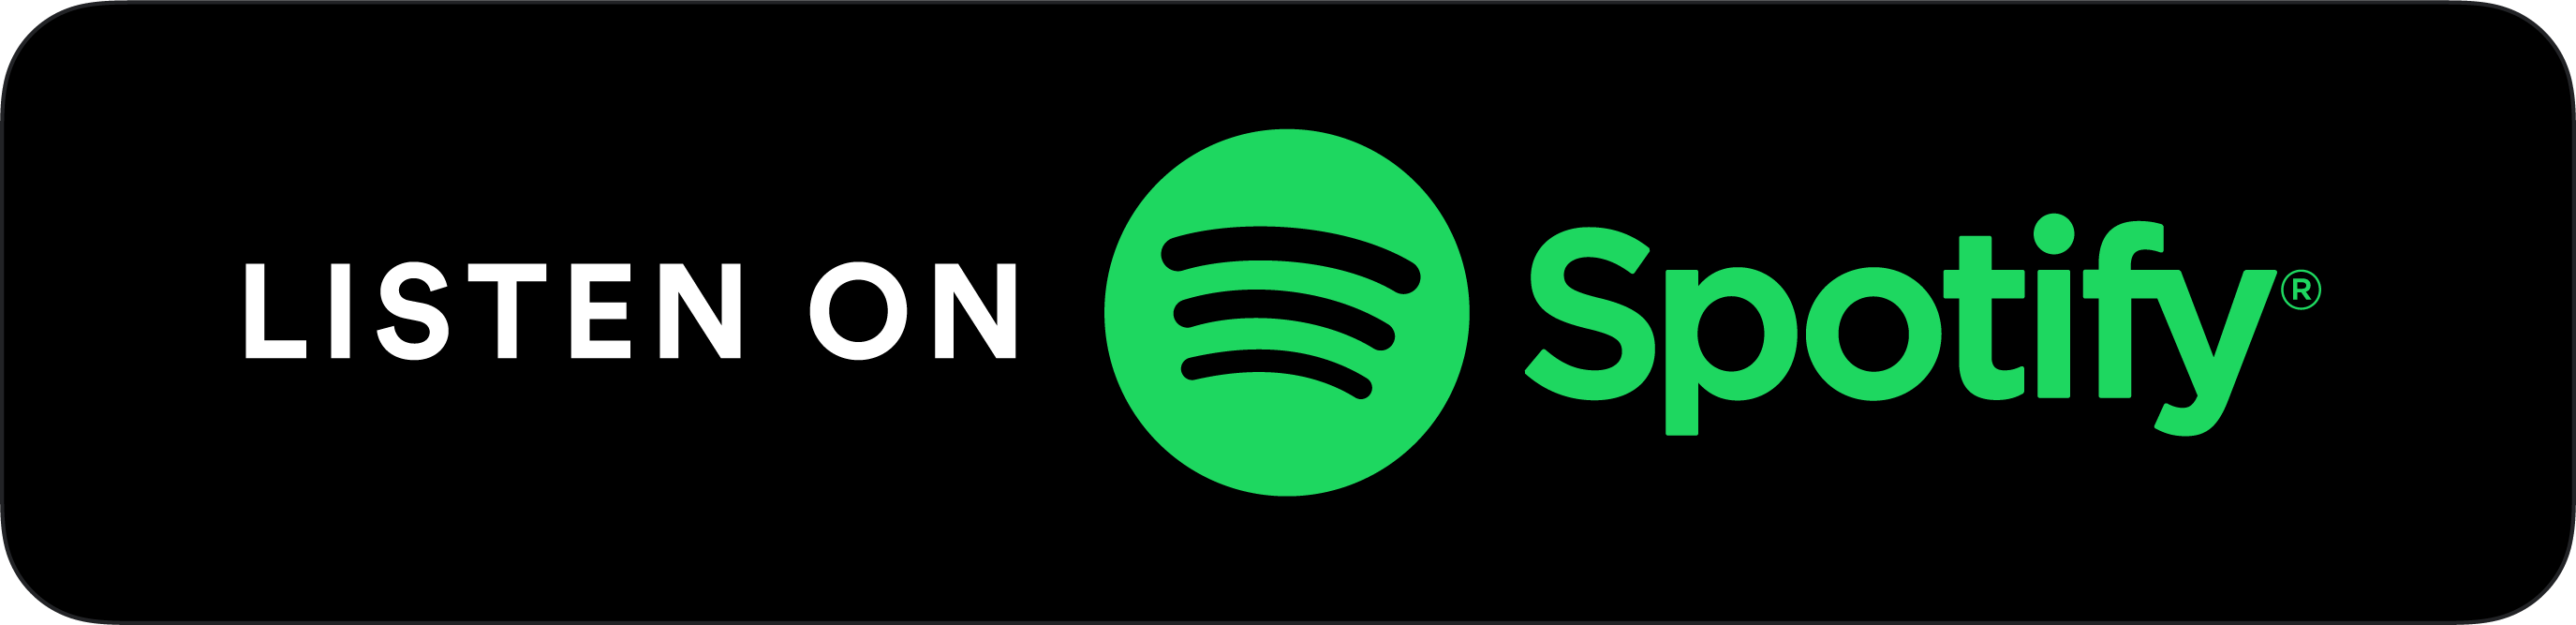 Spotify Podcasts Badge